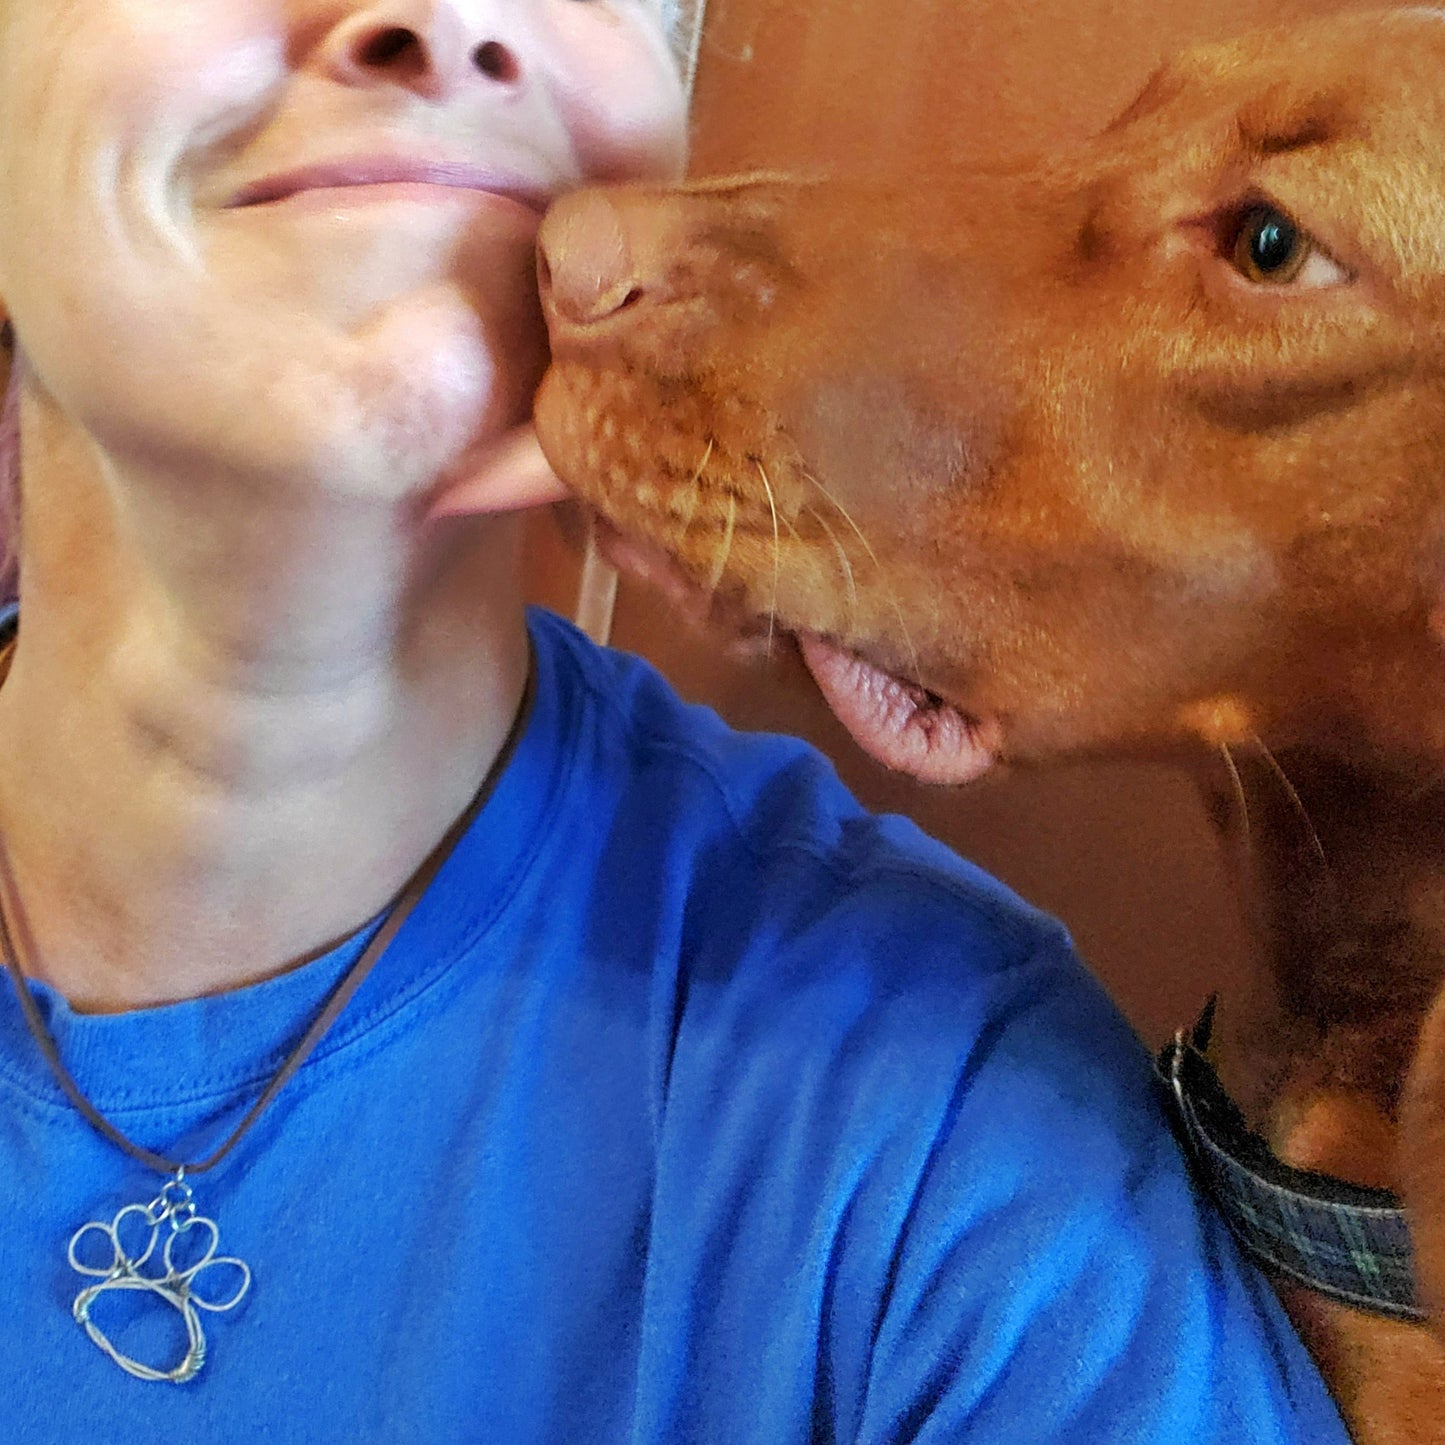 bottom of a woman's face wearing blue t-shirt and a necklace - necklace has a paw print pendant made from an upcycled guitar string - woman is being licked by a vizsla dog